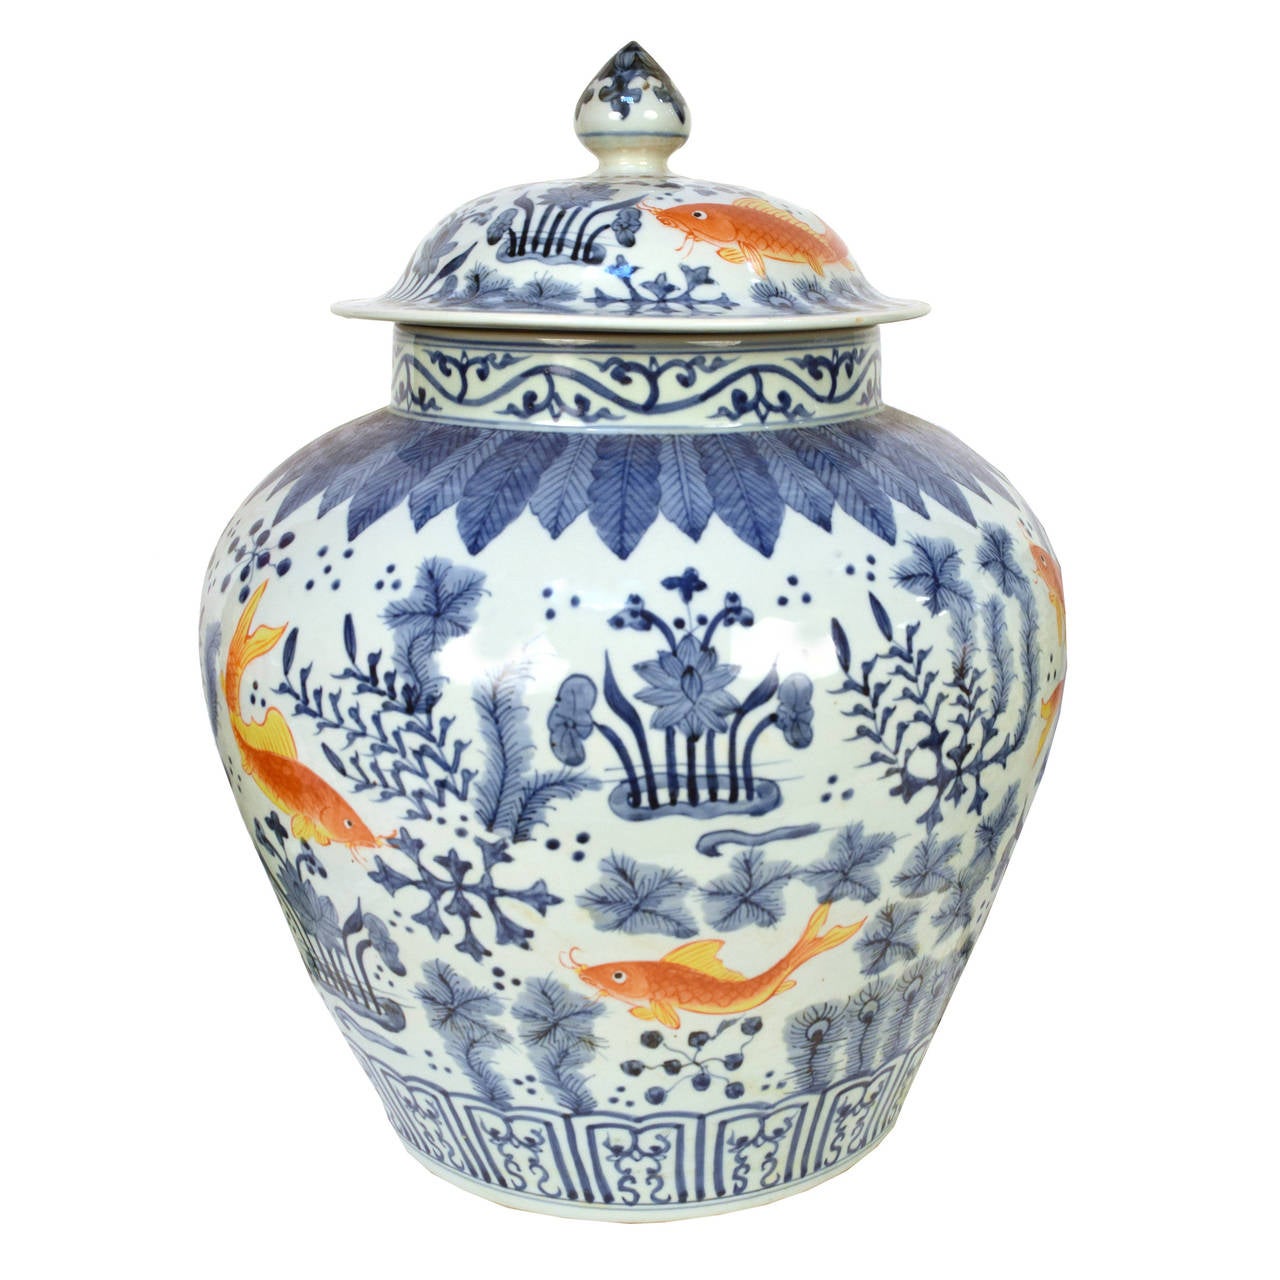 20th Century Pair of Chinese Blue and White Covered Jar with Fish and Floral Motif